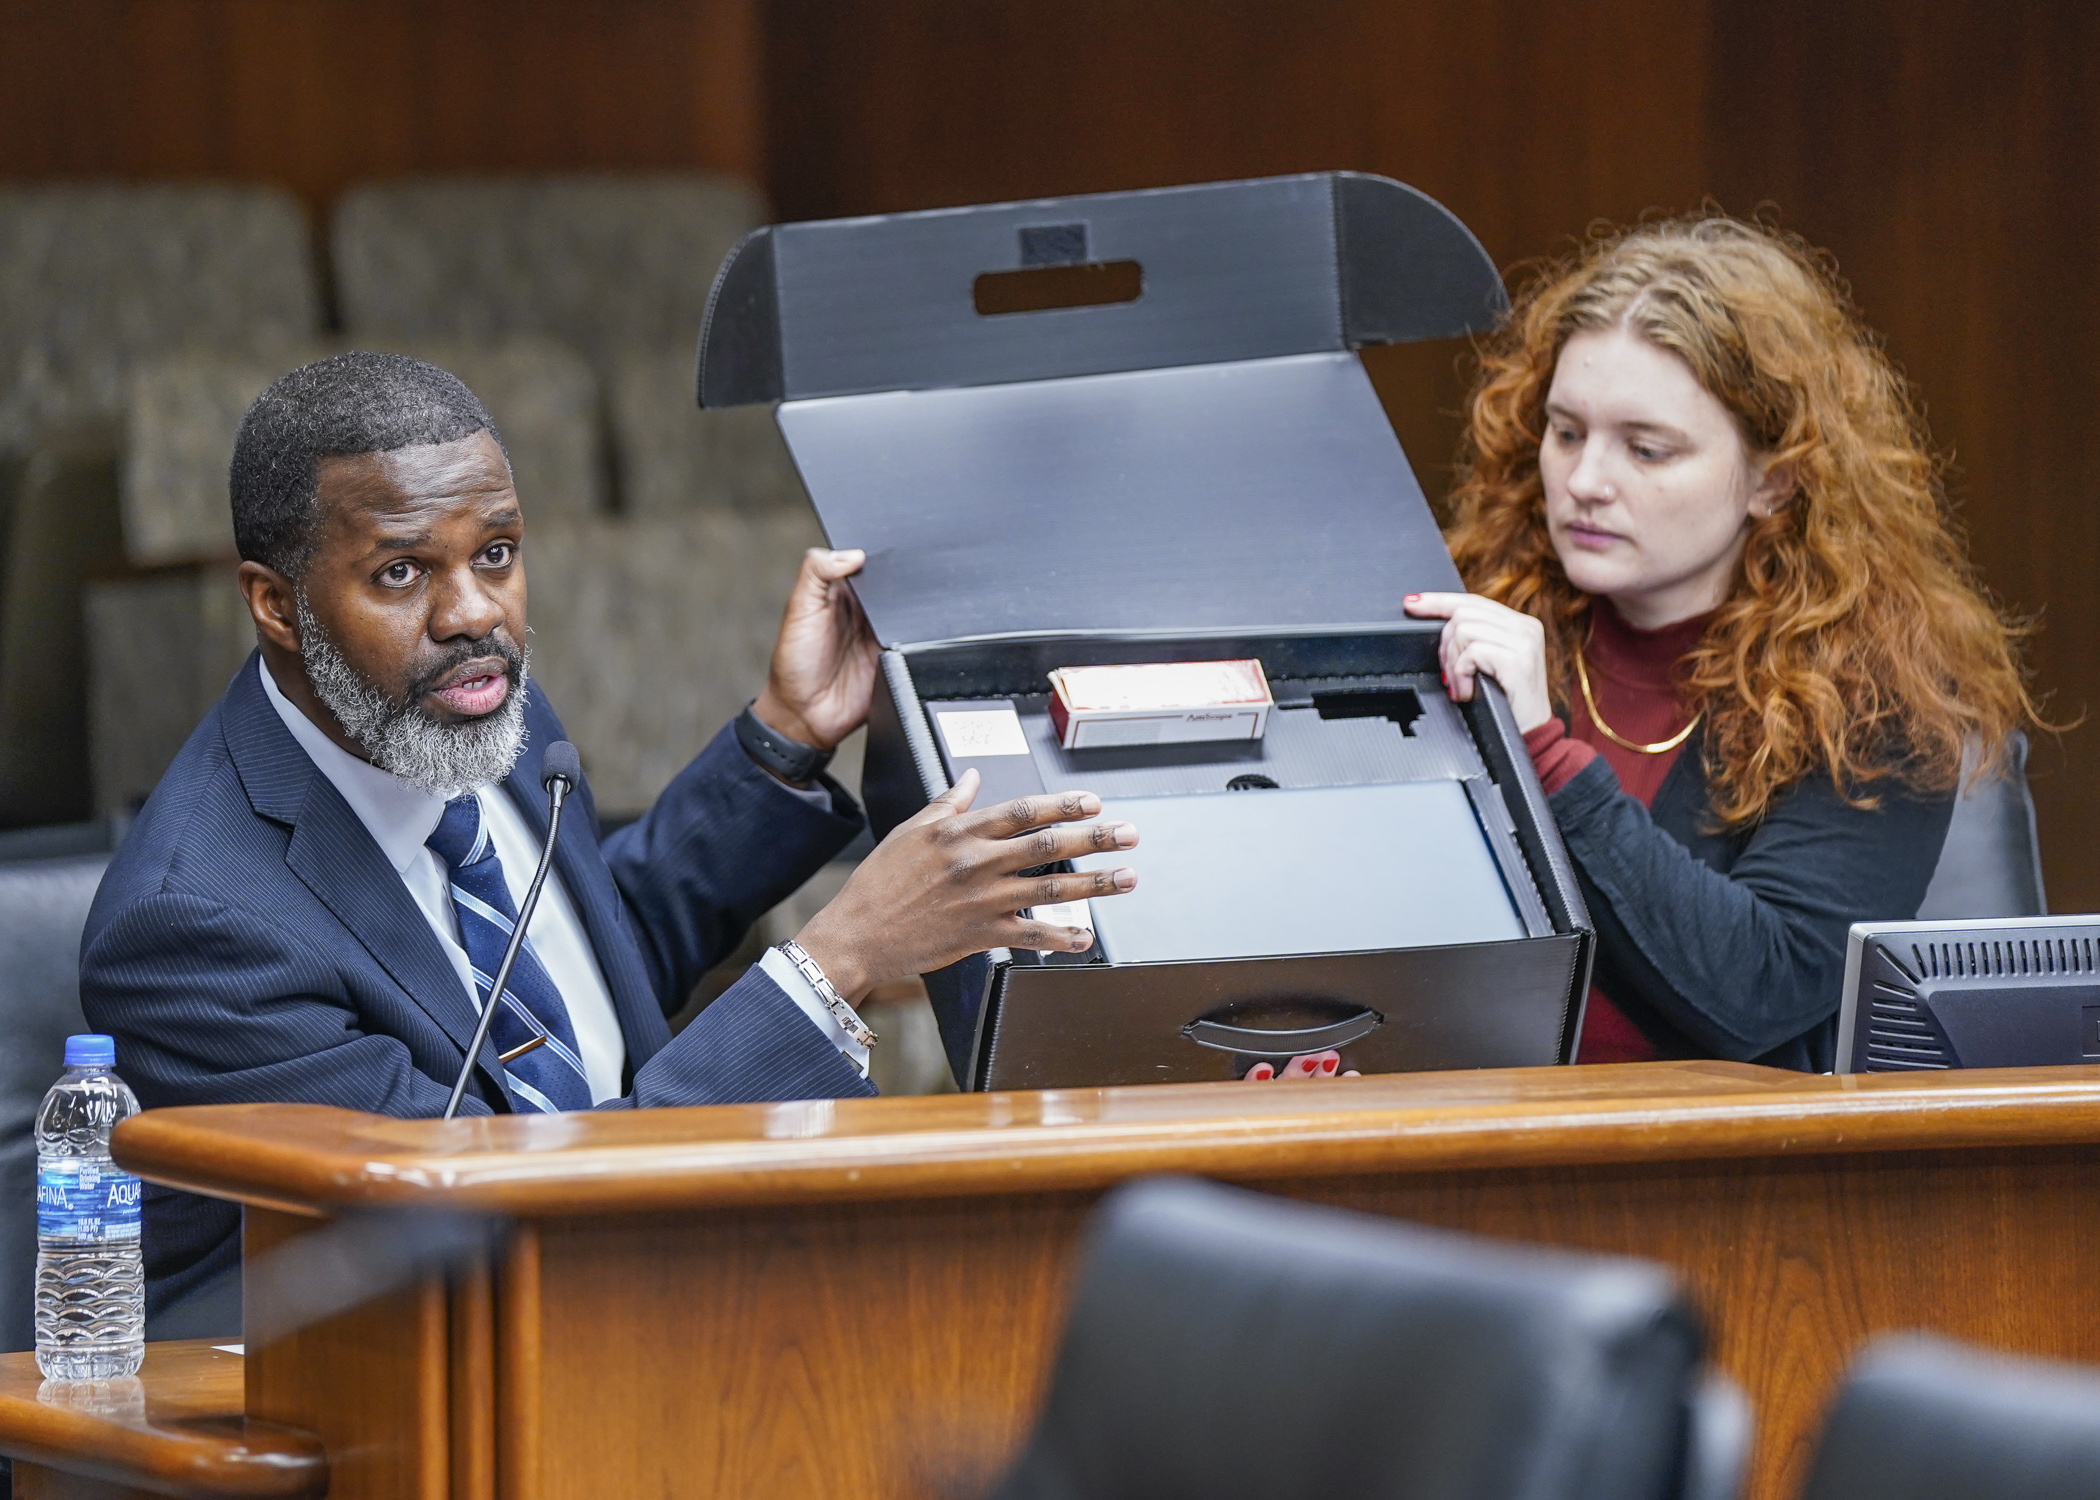 With the help of Rep. Sydney Jordan, Eric Black, president and CEO of Minnesota Diversified Industries, shows a STEM box that is designed to help individuals with disabilities find and secure employment. (Photo by Catherine Davis)